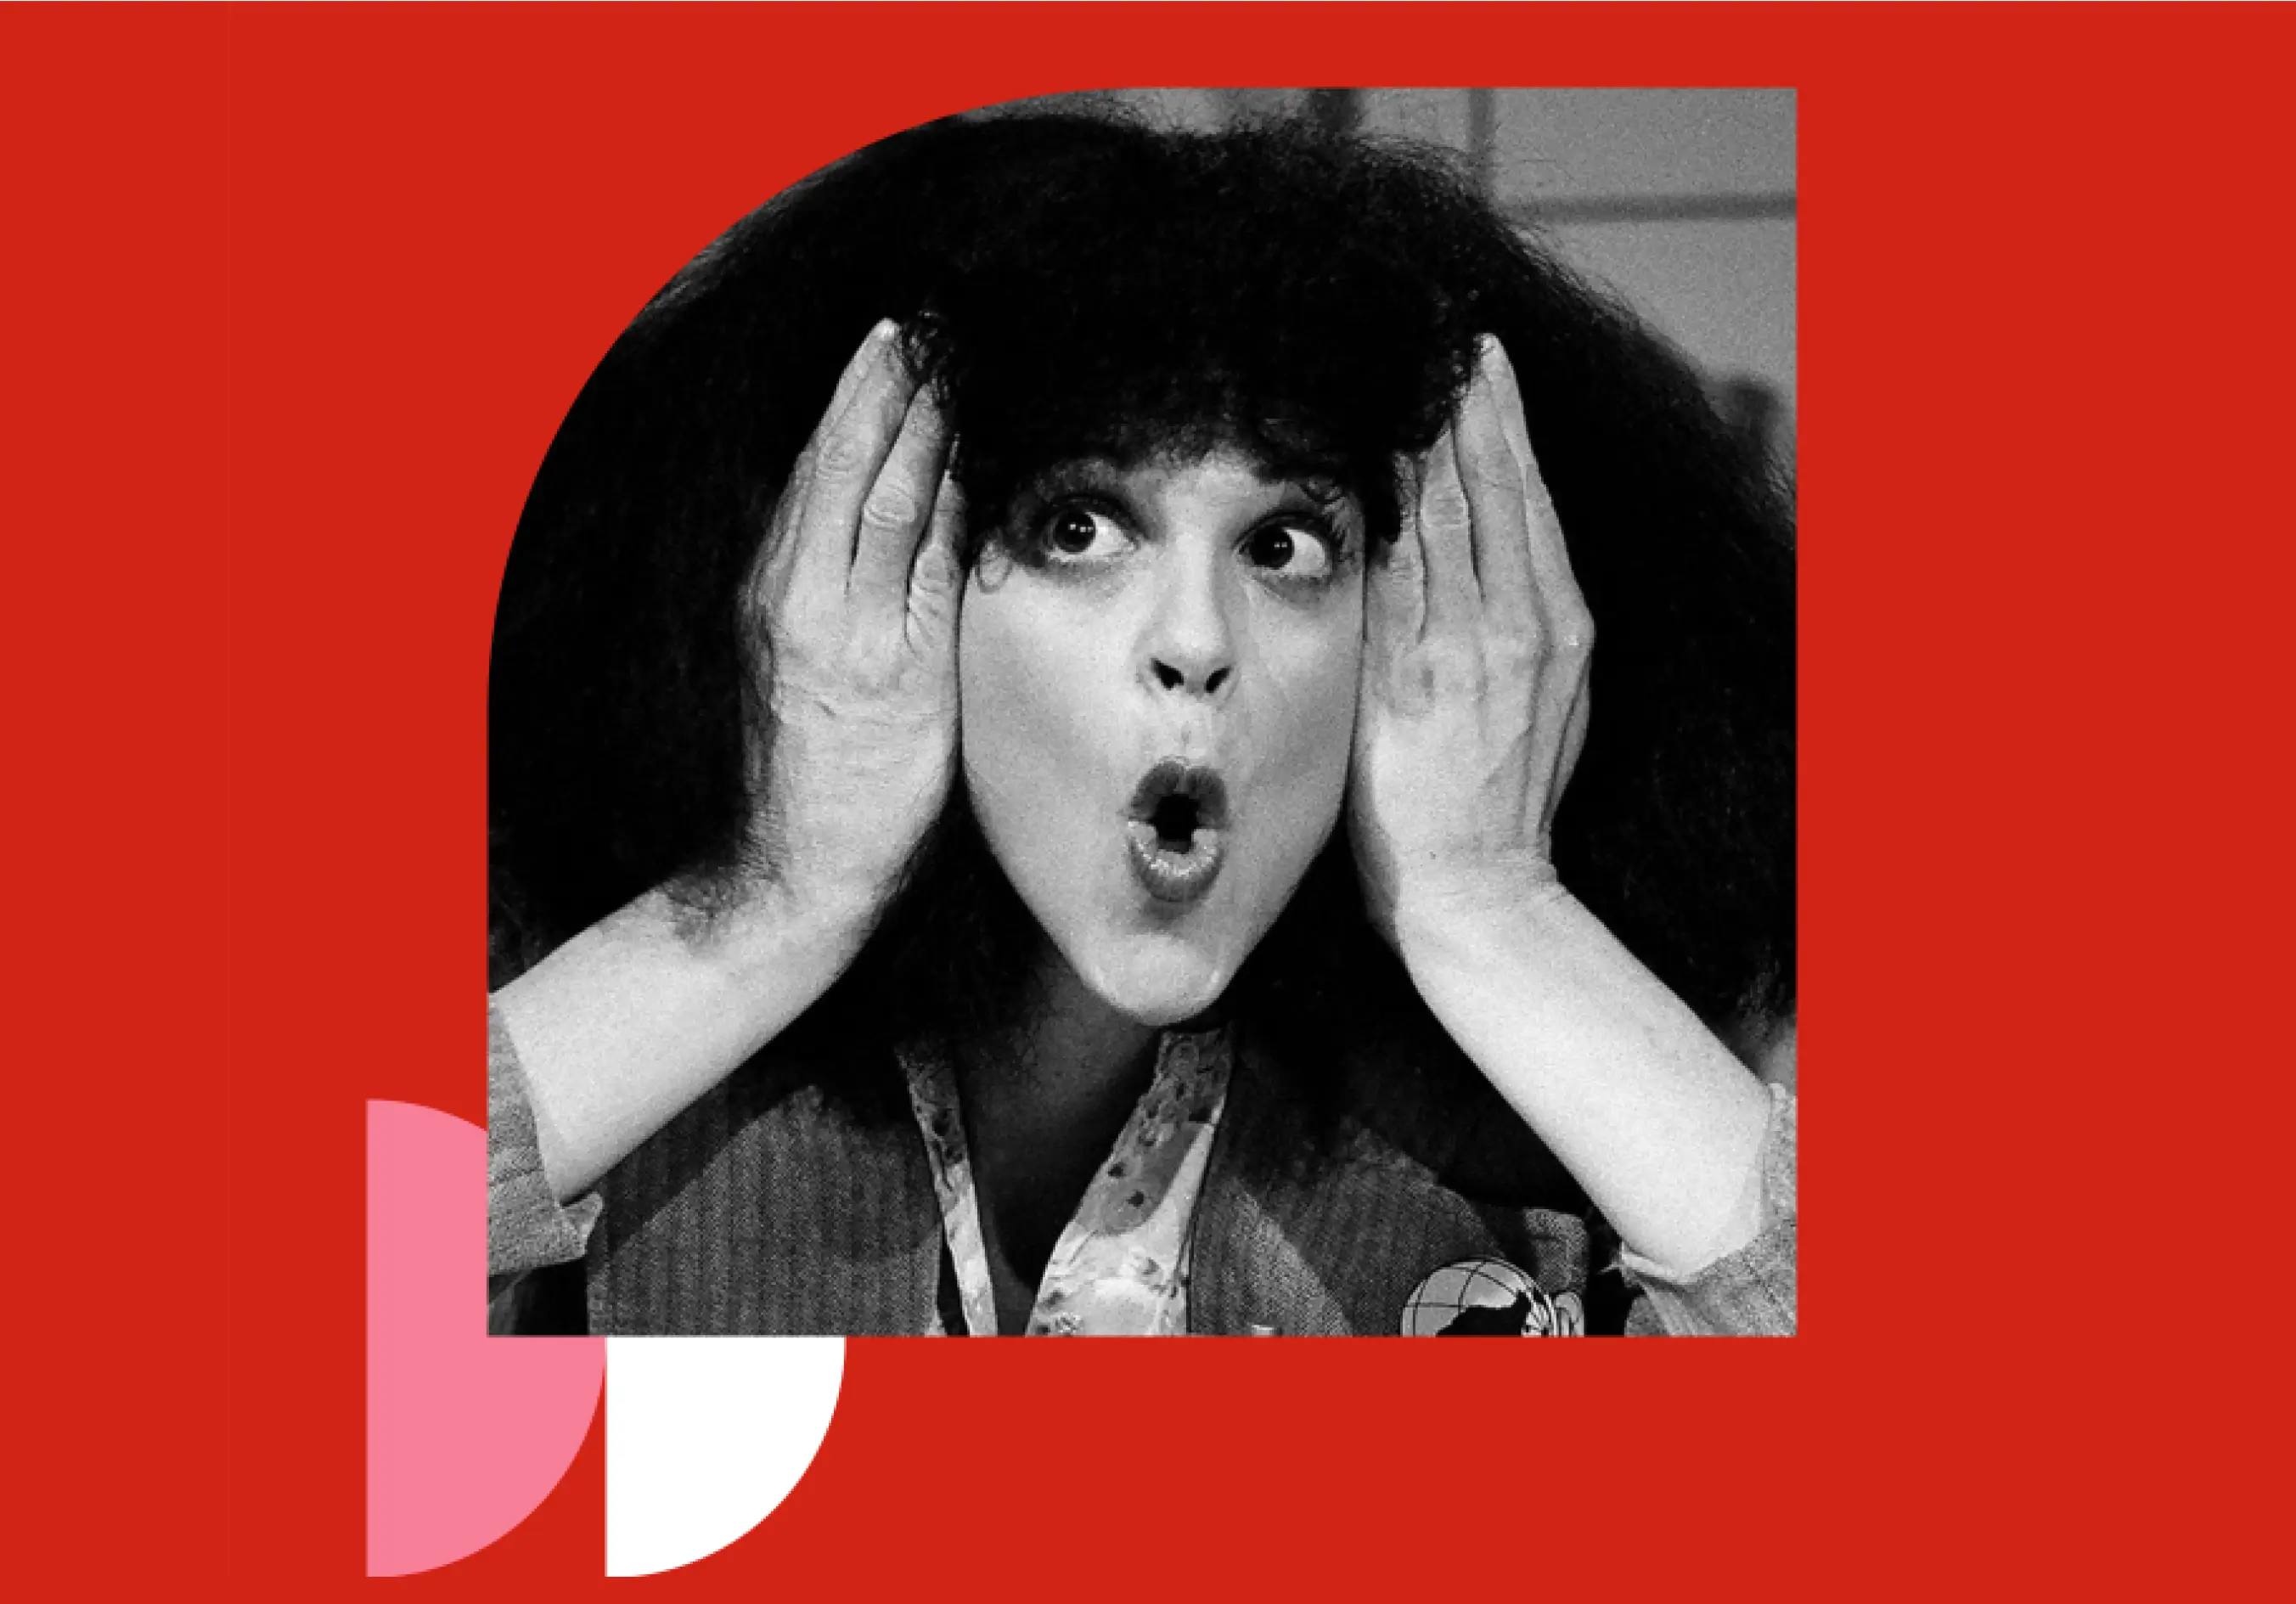 A close-up of the Gilda's Club Greater Toronto website featuring rounded geometric shapes masking a black and white image of a woman (Gilda Radner).